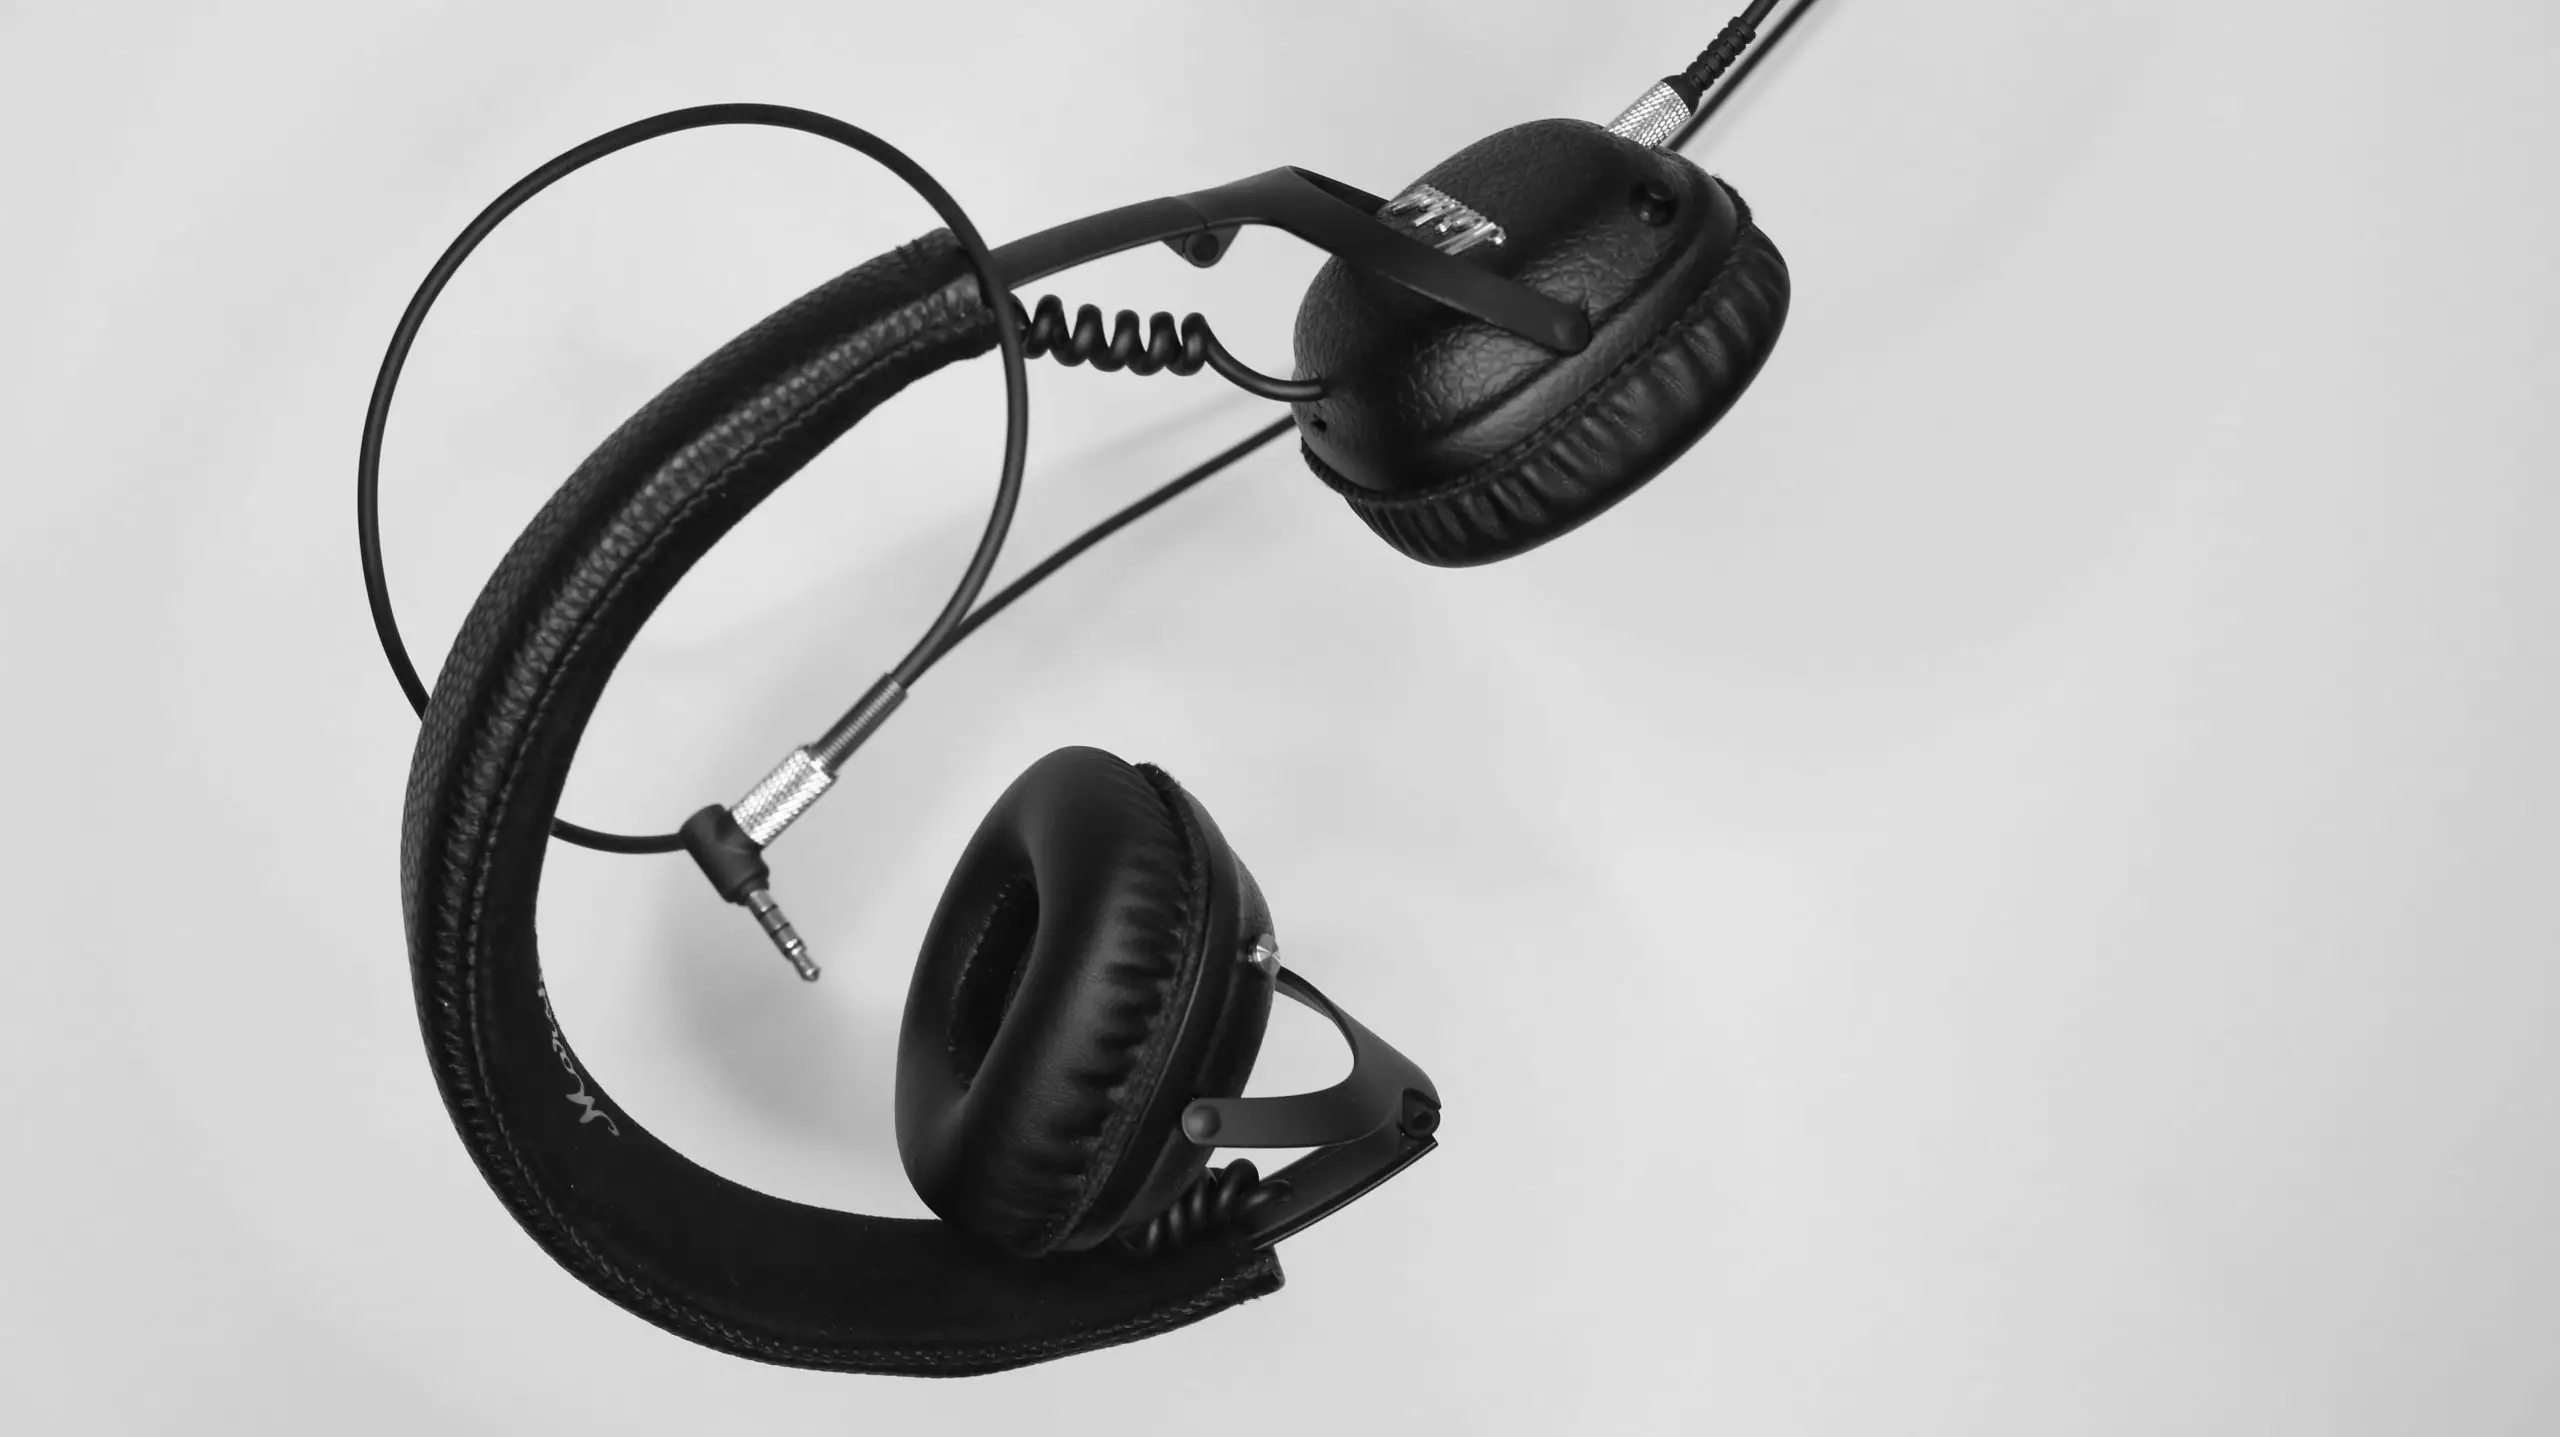 Reasons Why Your Turtle Beach Headset Mic Is Not Working